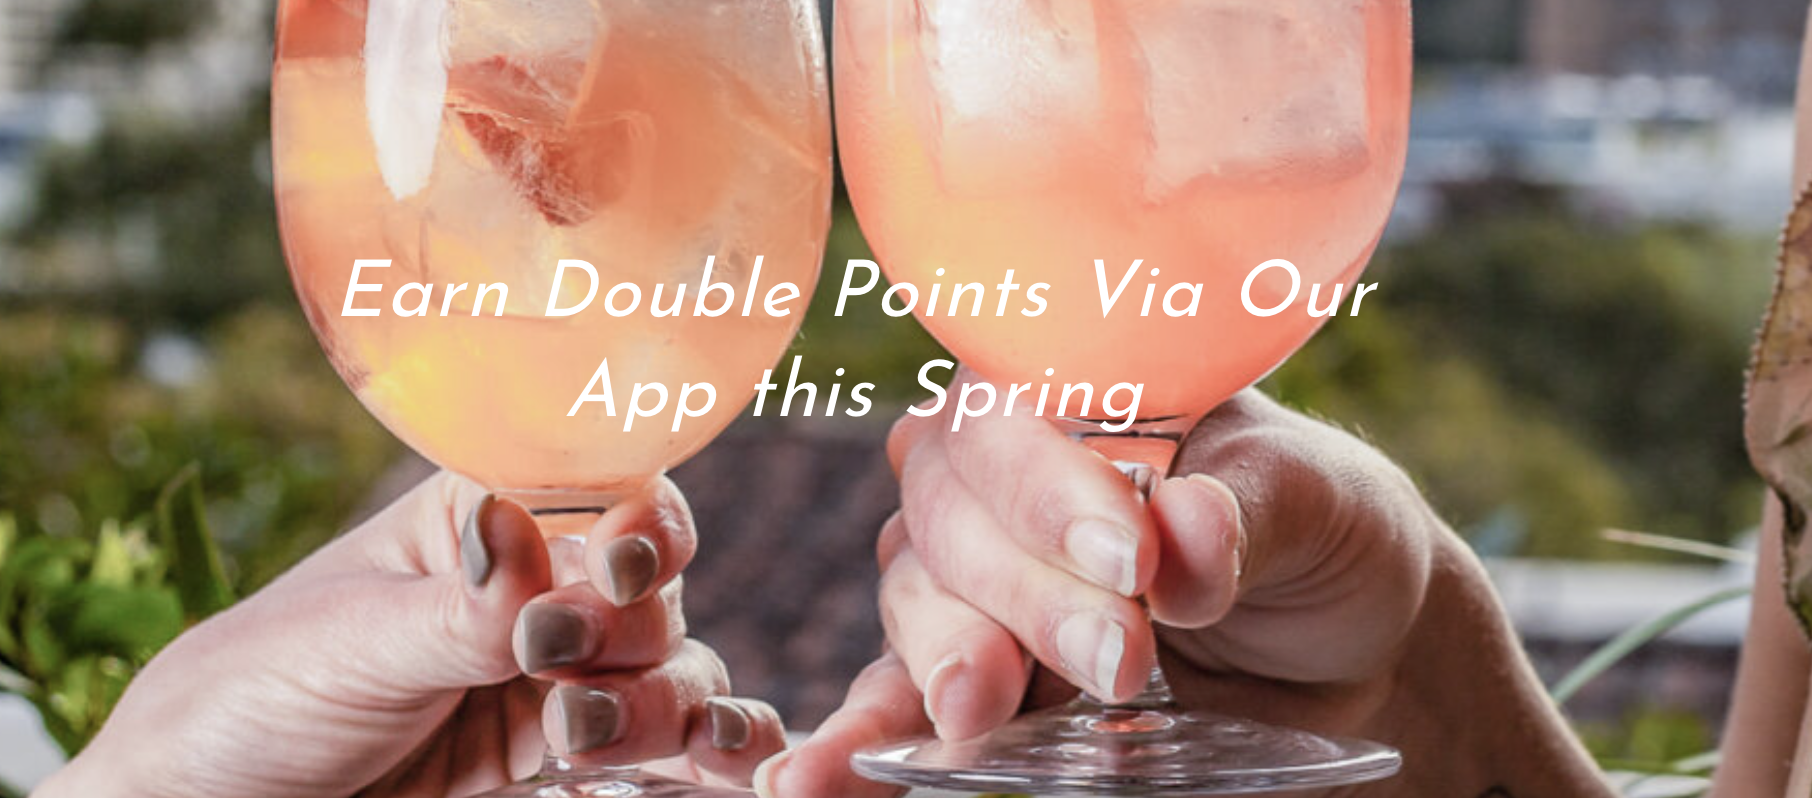 Earn double points on the app this Spring!